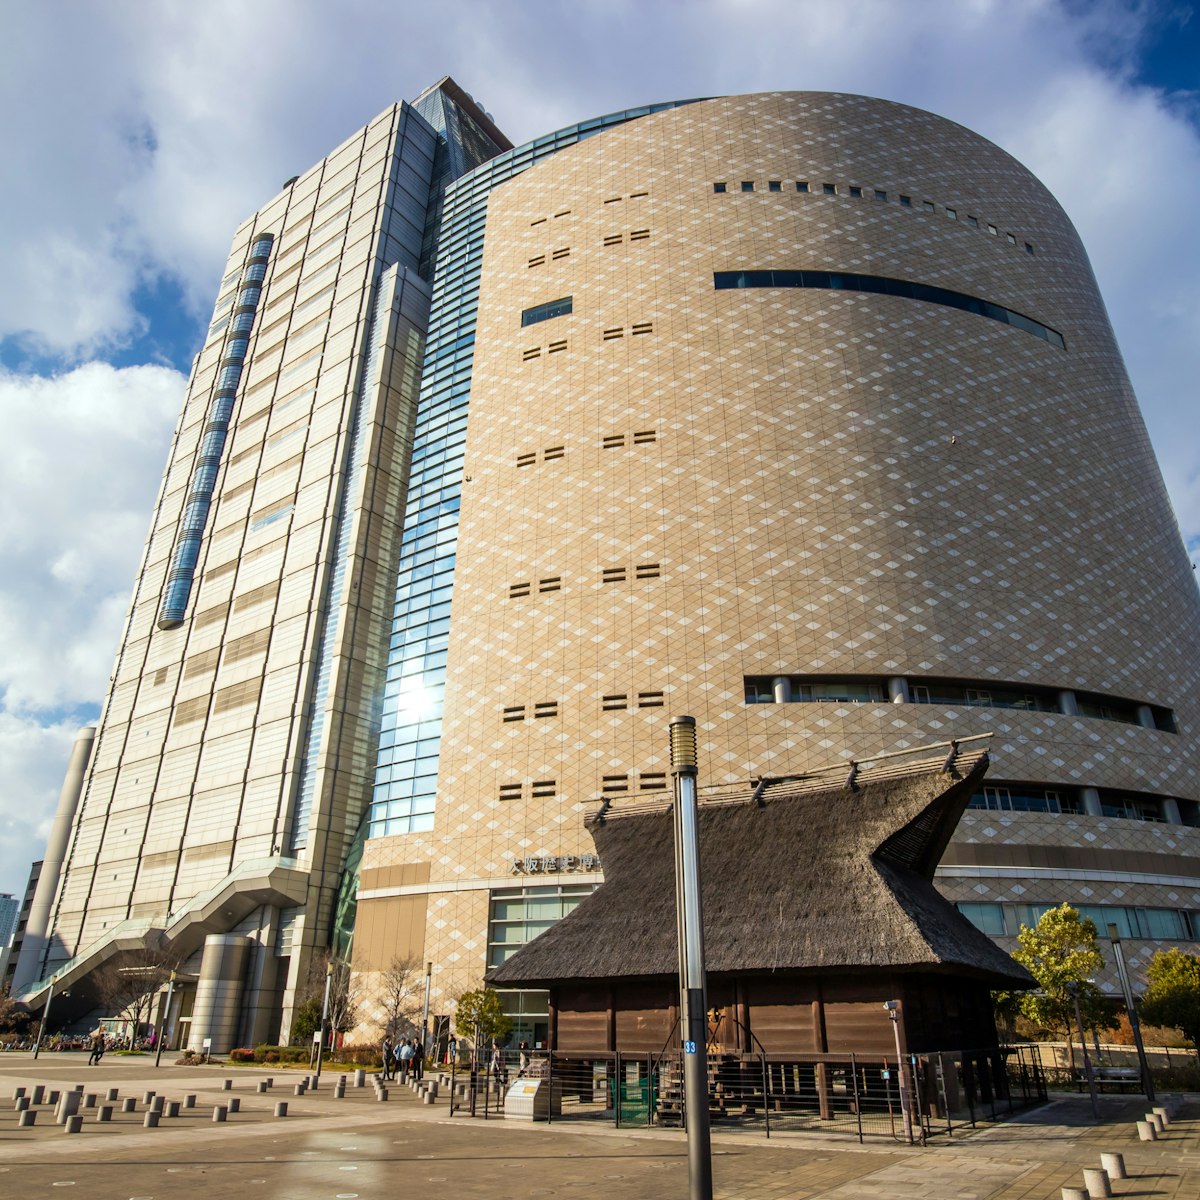 OSAKA, JAPAN - JANUARY 13: Osaka Museum of History on January 13, 2016. Osaka Museum of History is located next to NHK Osaka and opened in 2003.; Shutterstock ID 363348881; Your name (First / Last): Laura Crawford; GL account no.: 65050; Netsuite department name: Online Editorial; Full Product or Project name including edition: Osaka city app POI images